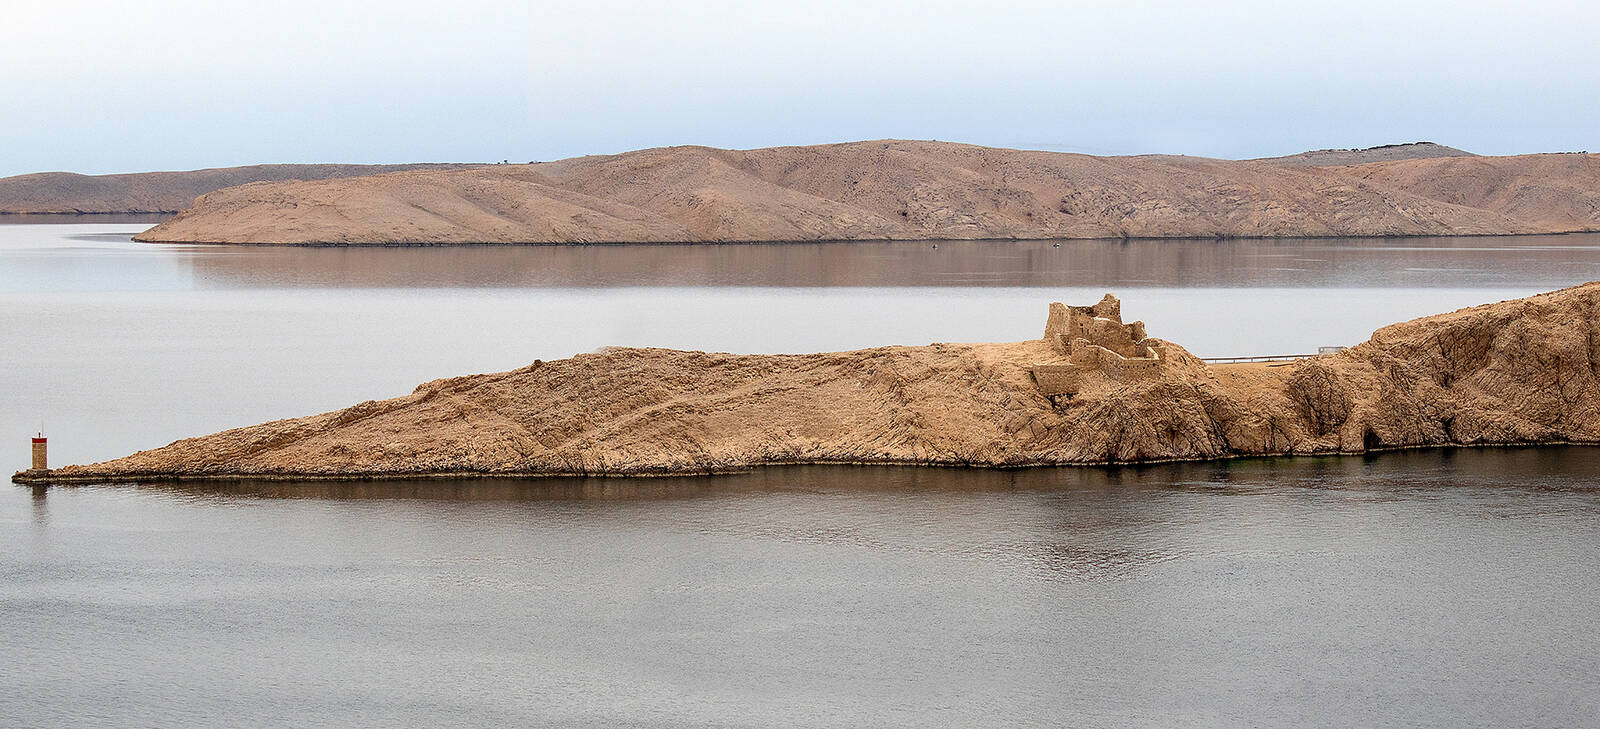 Image of Fortica Ruins from Pag Bridge by Simon Kovacic